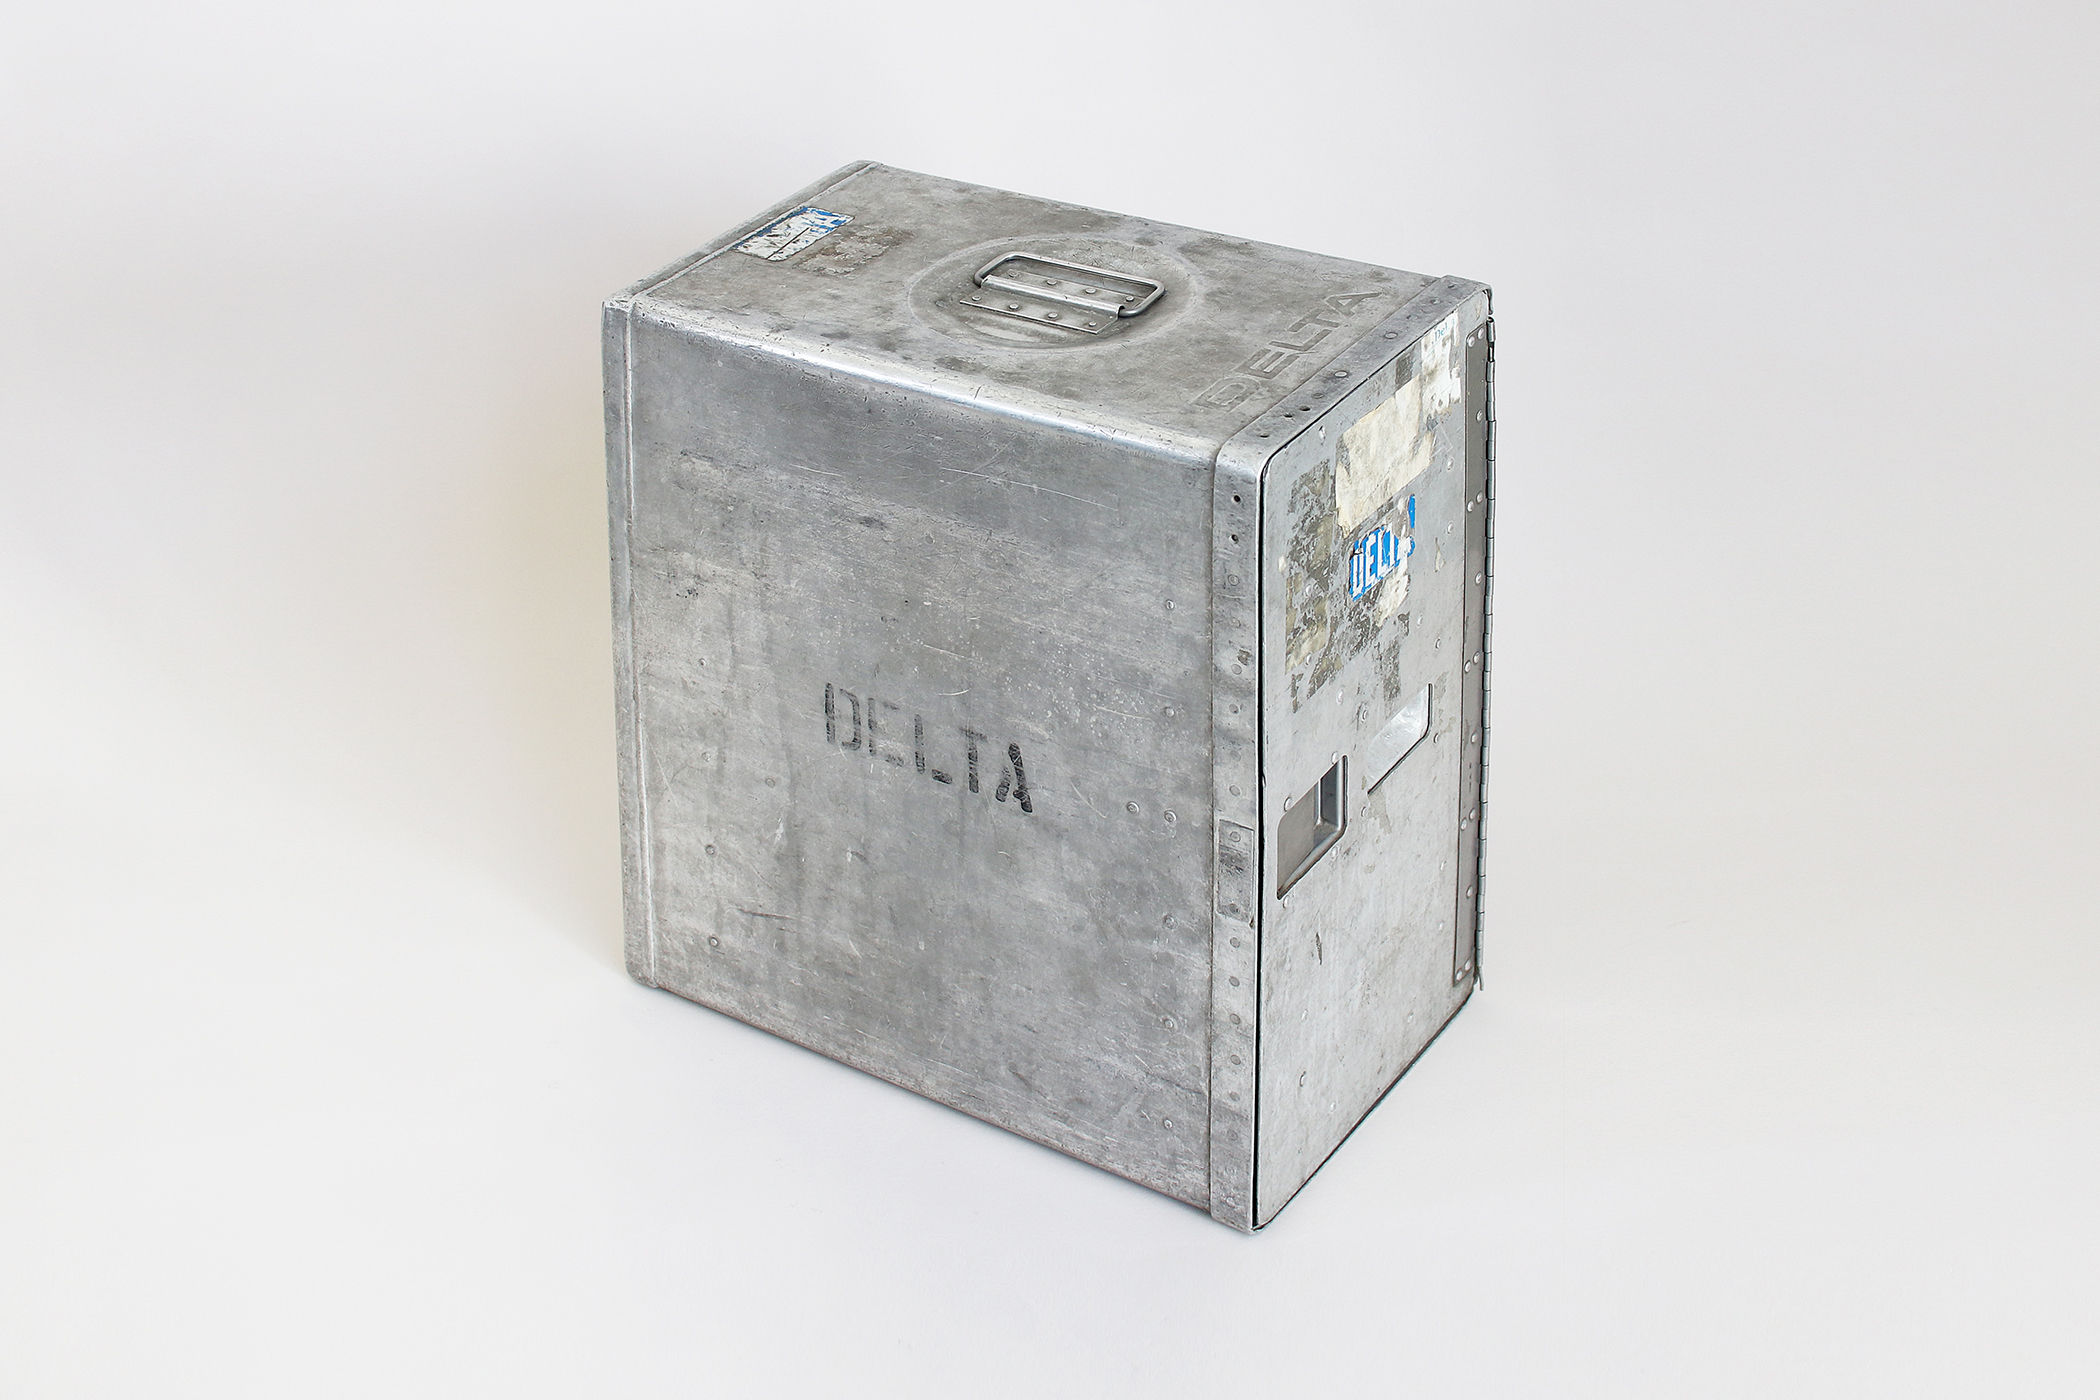 DELTA AIRLINE GALLEY  ALUMINUMCONTAINER